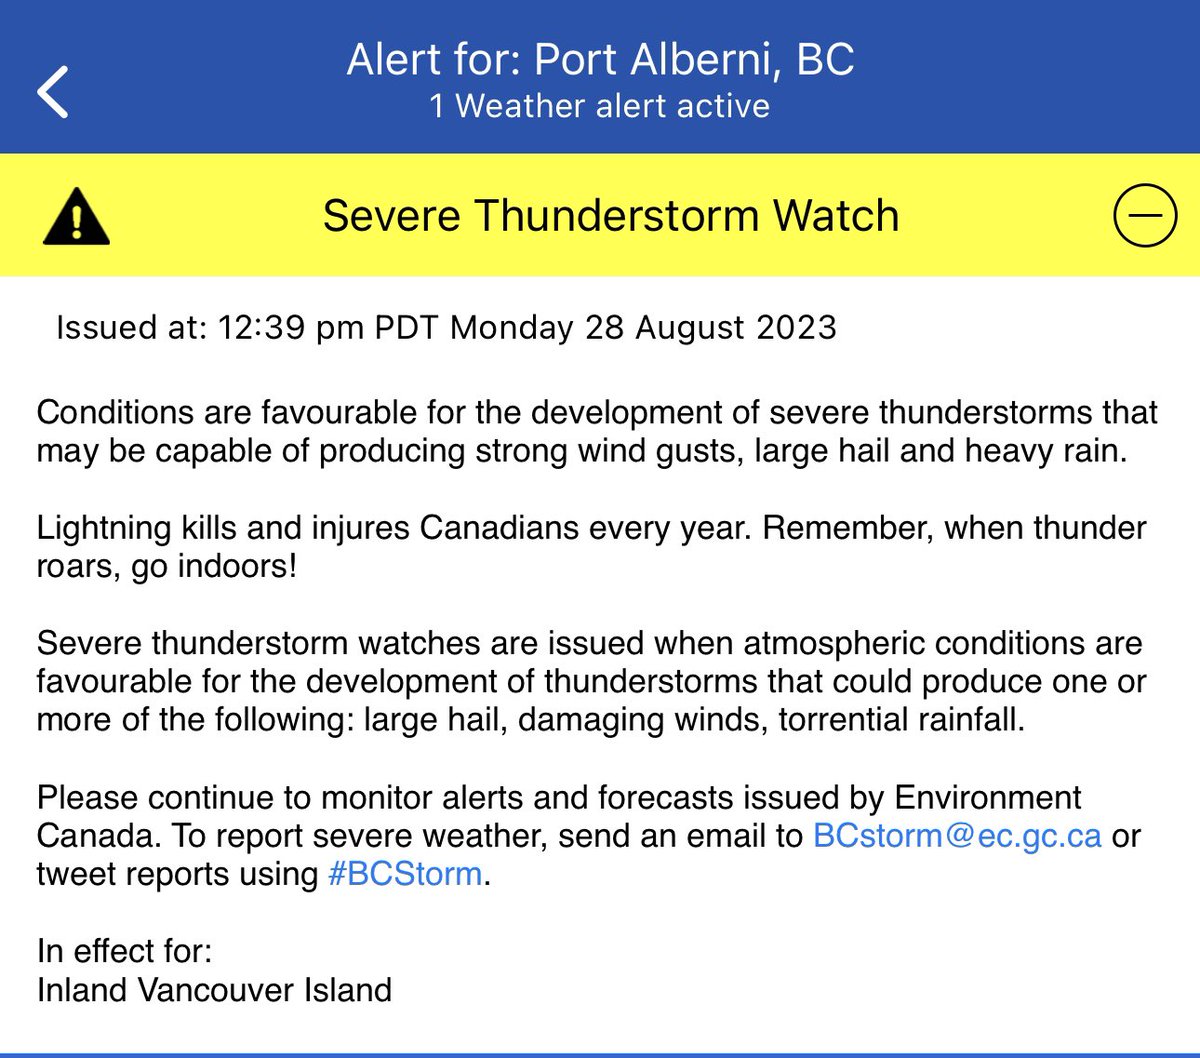 #SevereThunderstormWatch issued for inland sections of #VanIsle/#VancouverIsland inclg #PortAlberni #BC — have a way to receive alerts this PM & evening and if possible, avoid backcountry activities.
(And as I am typing this, a warning issued for east of #GoldRiver)

#BCstorm